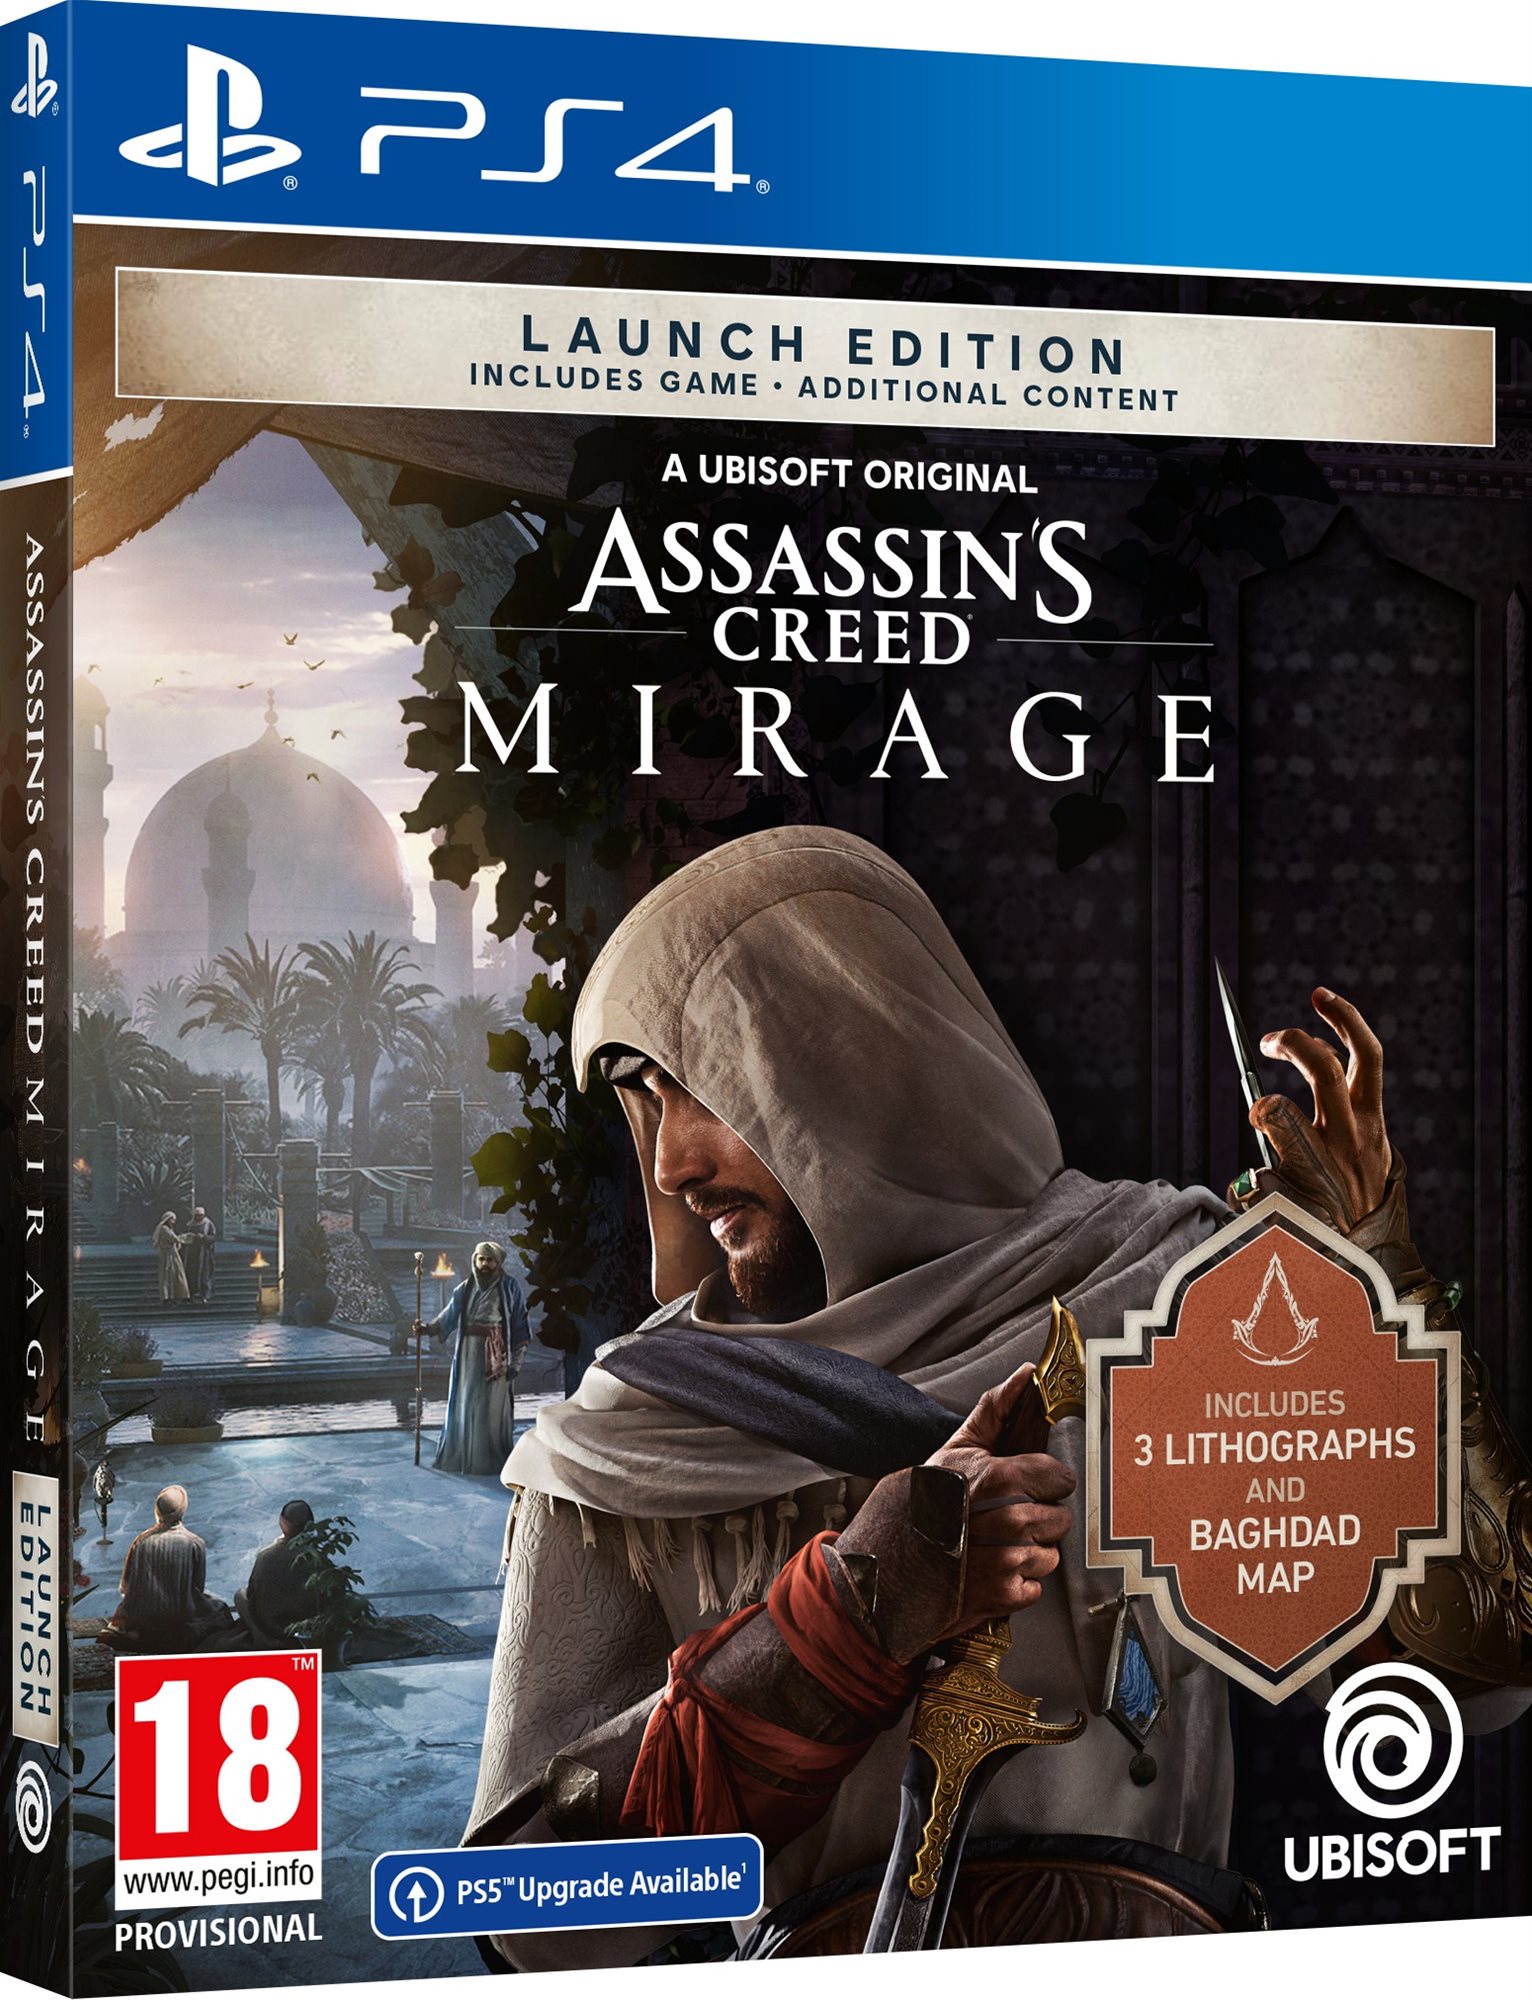 Assassins Creed Mirage: Launch Edition - PS4